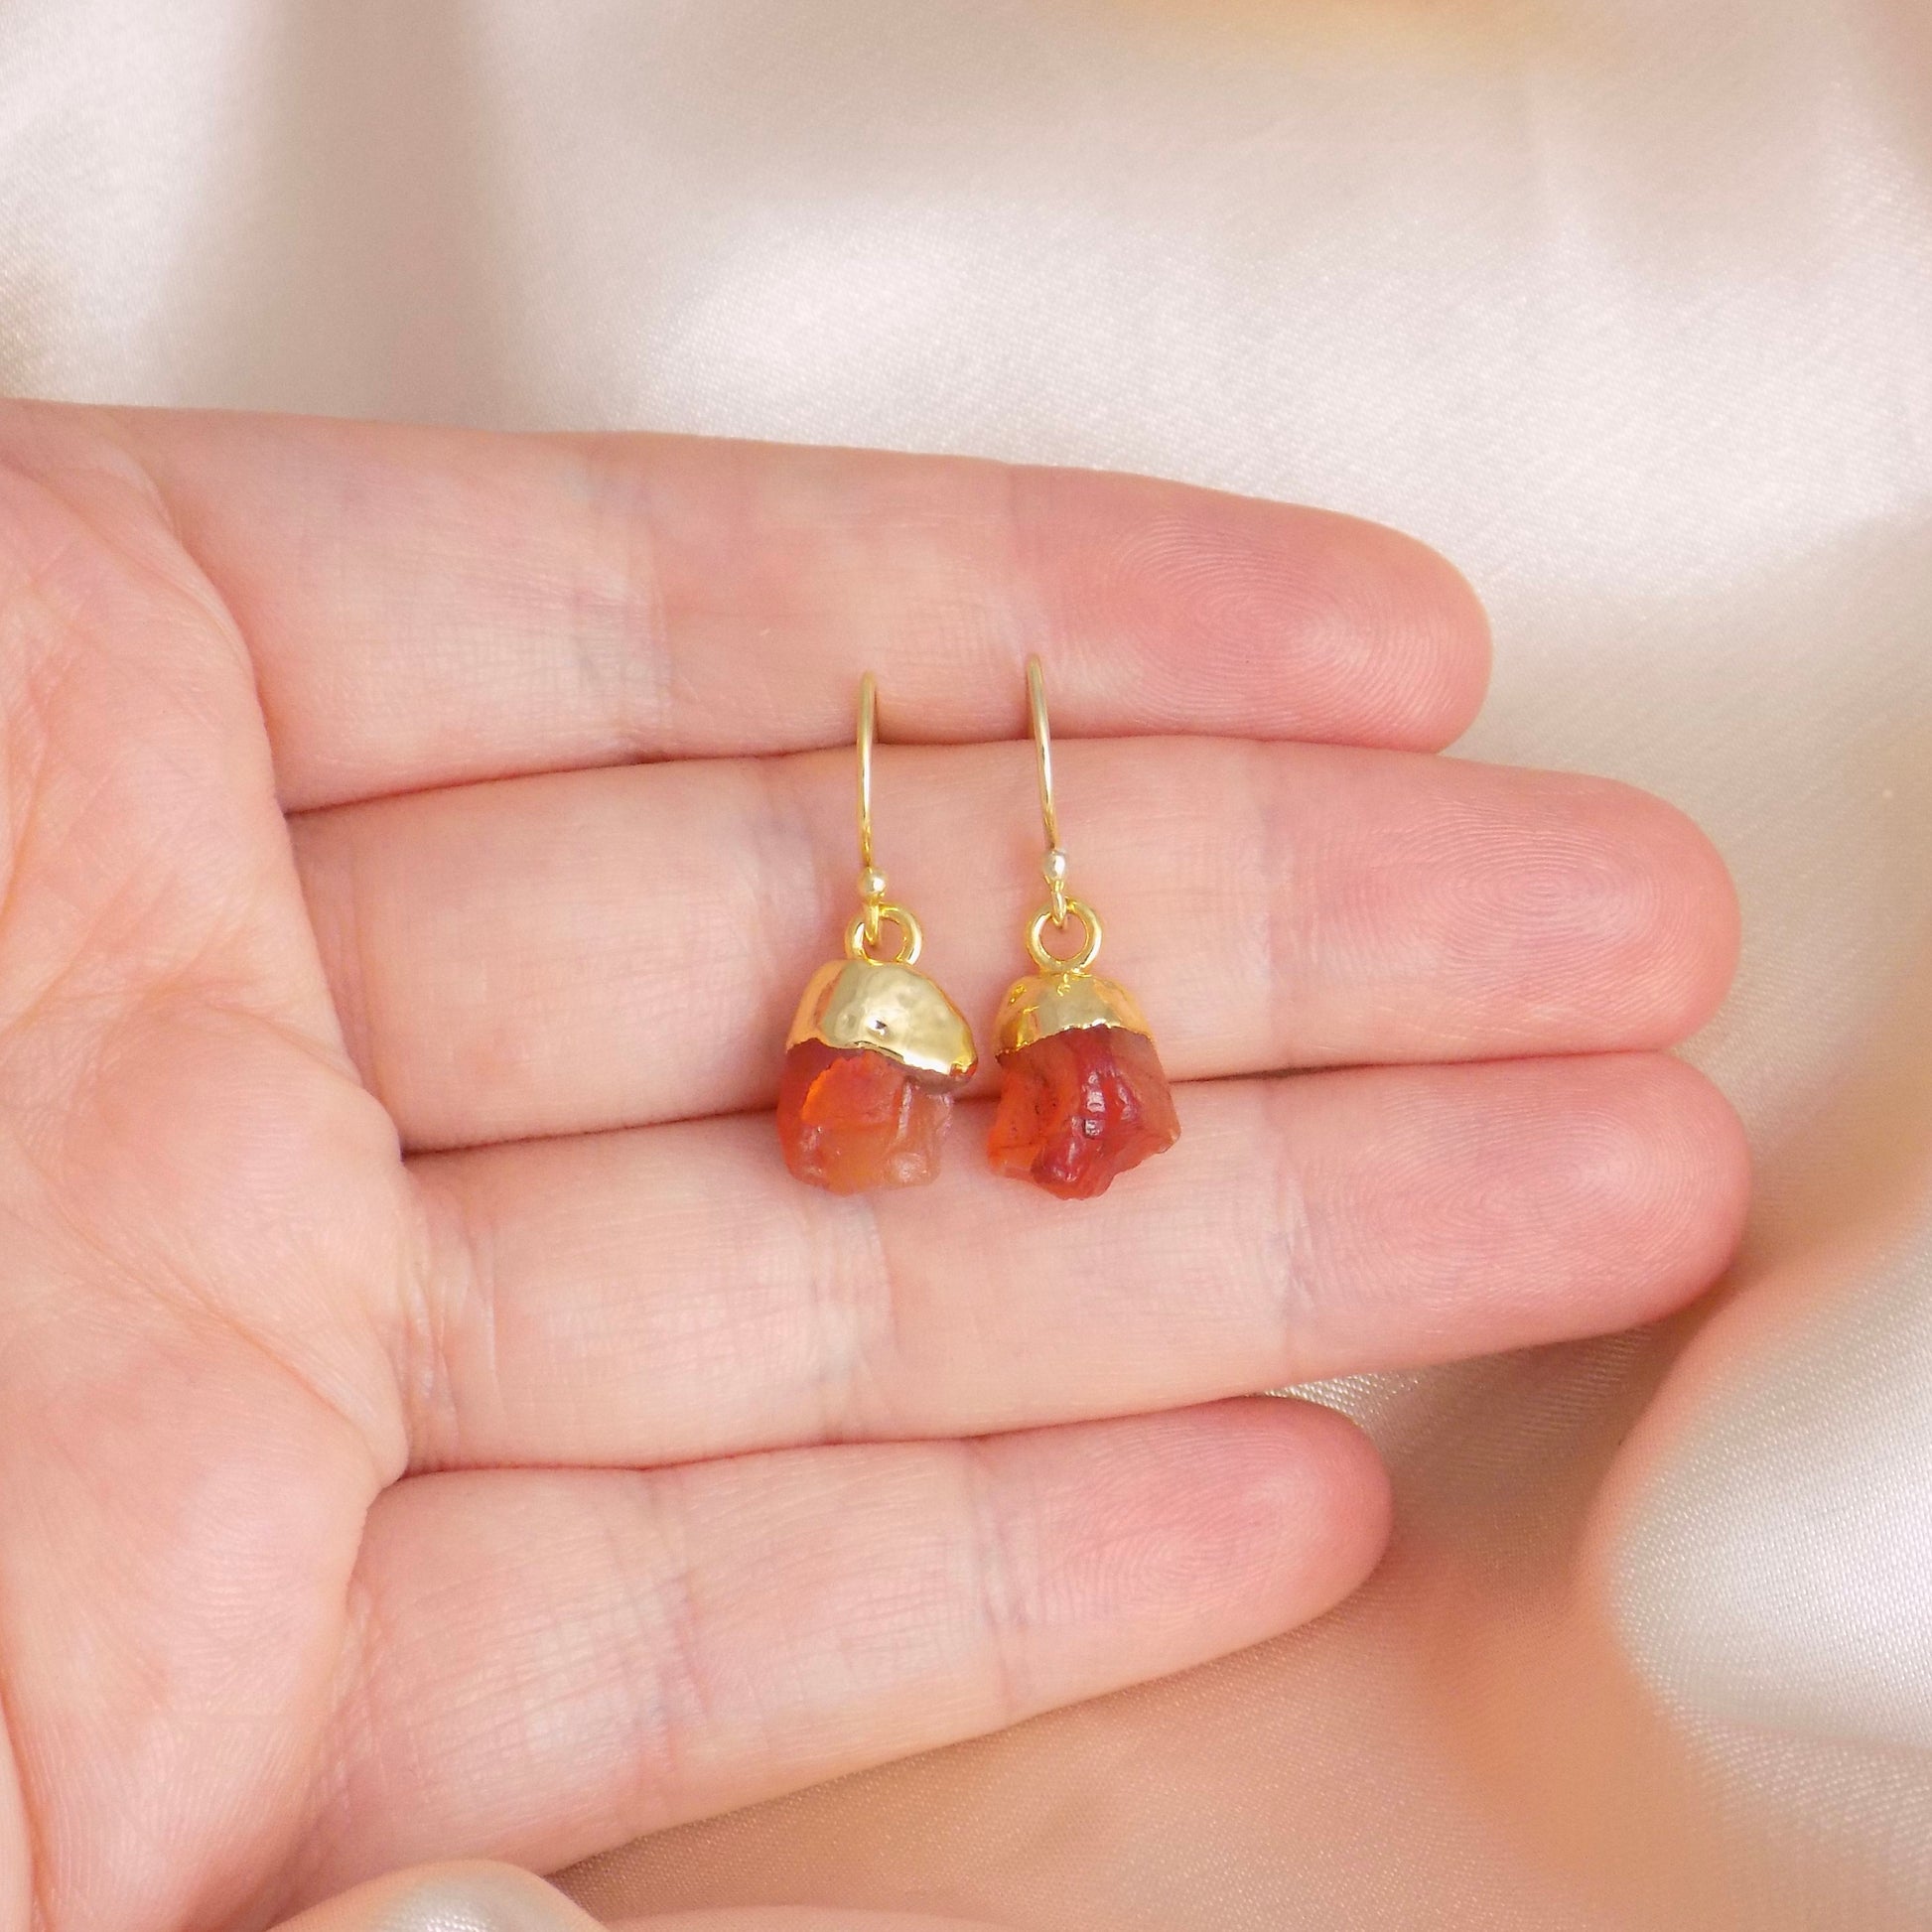 Valentines Day Gift, Raw Carnelian Earrings Gold, Rough Stone Orange Brown Earring, Gifts For Wife, G14-776